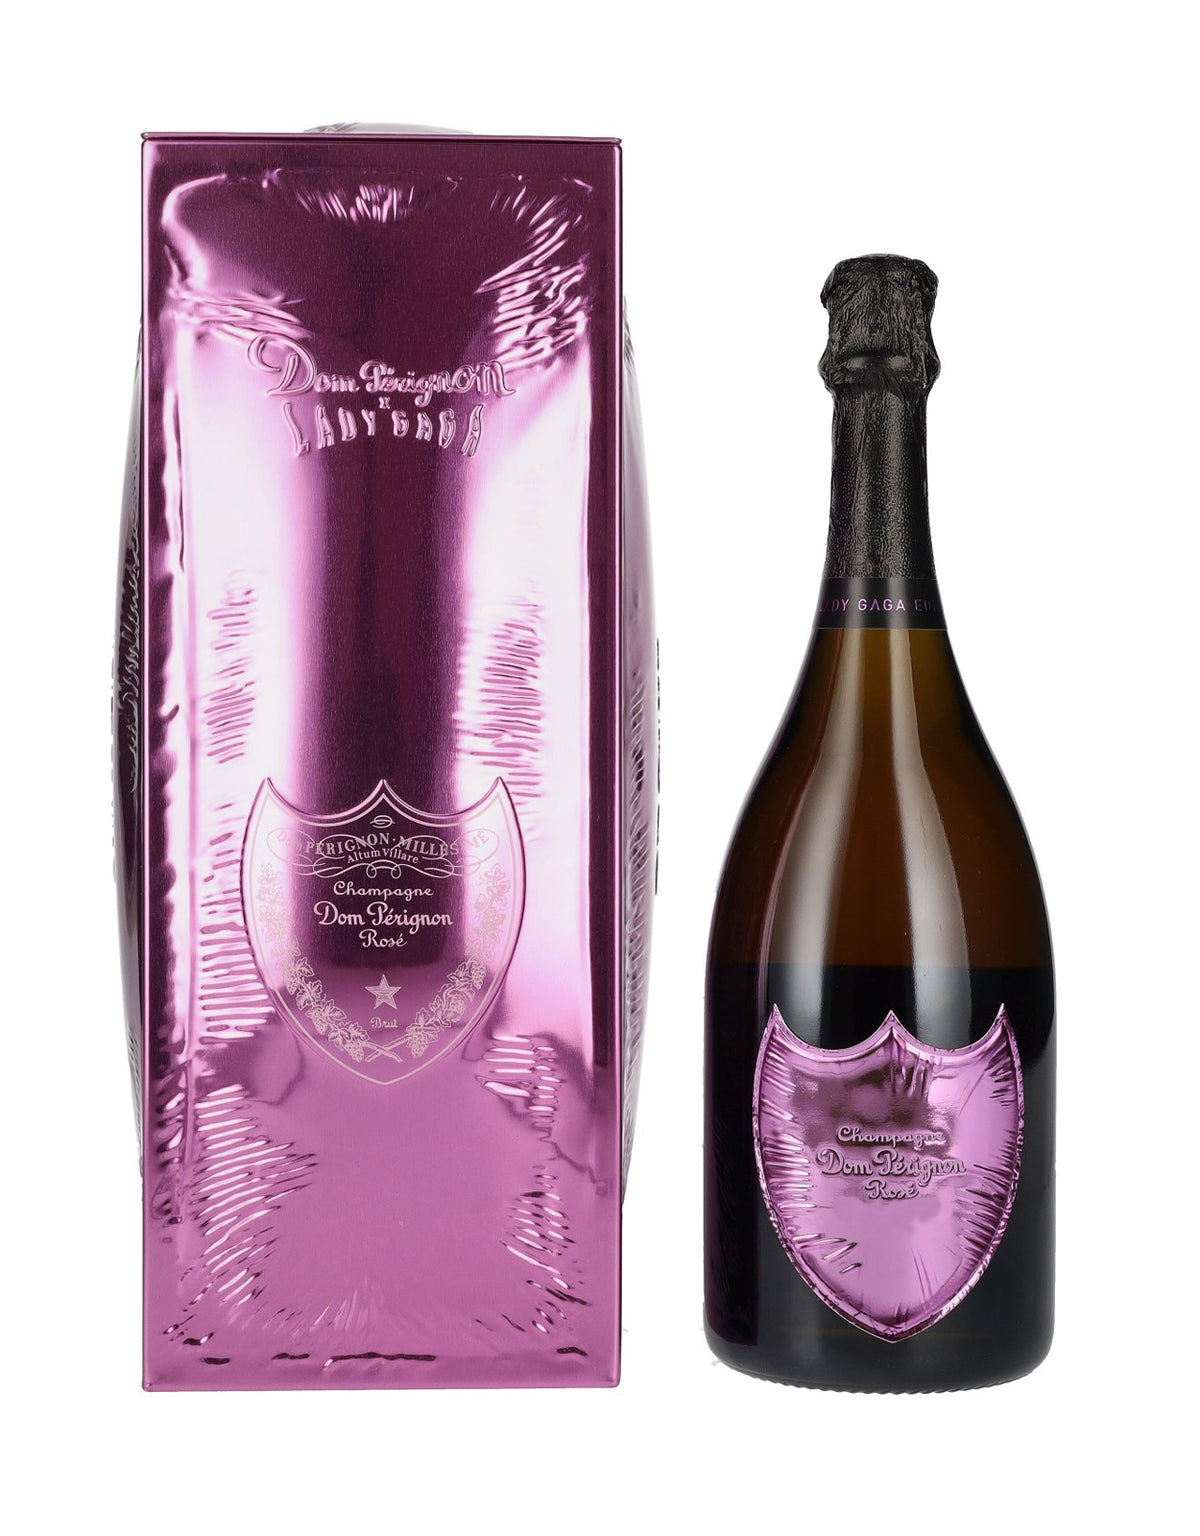 Dom Perignon 2010 Lady Gaga Brut limited Edition - Old Town Tequila